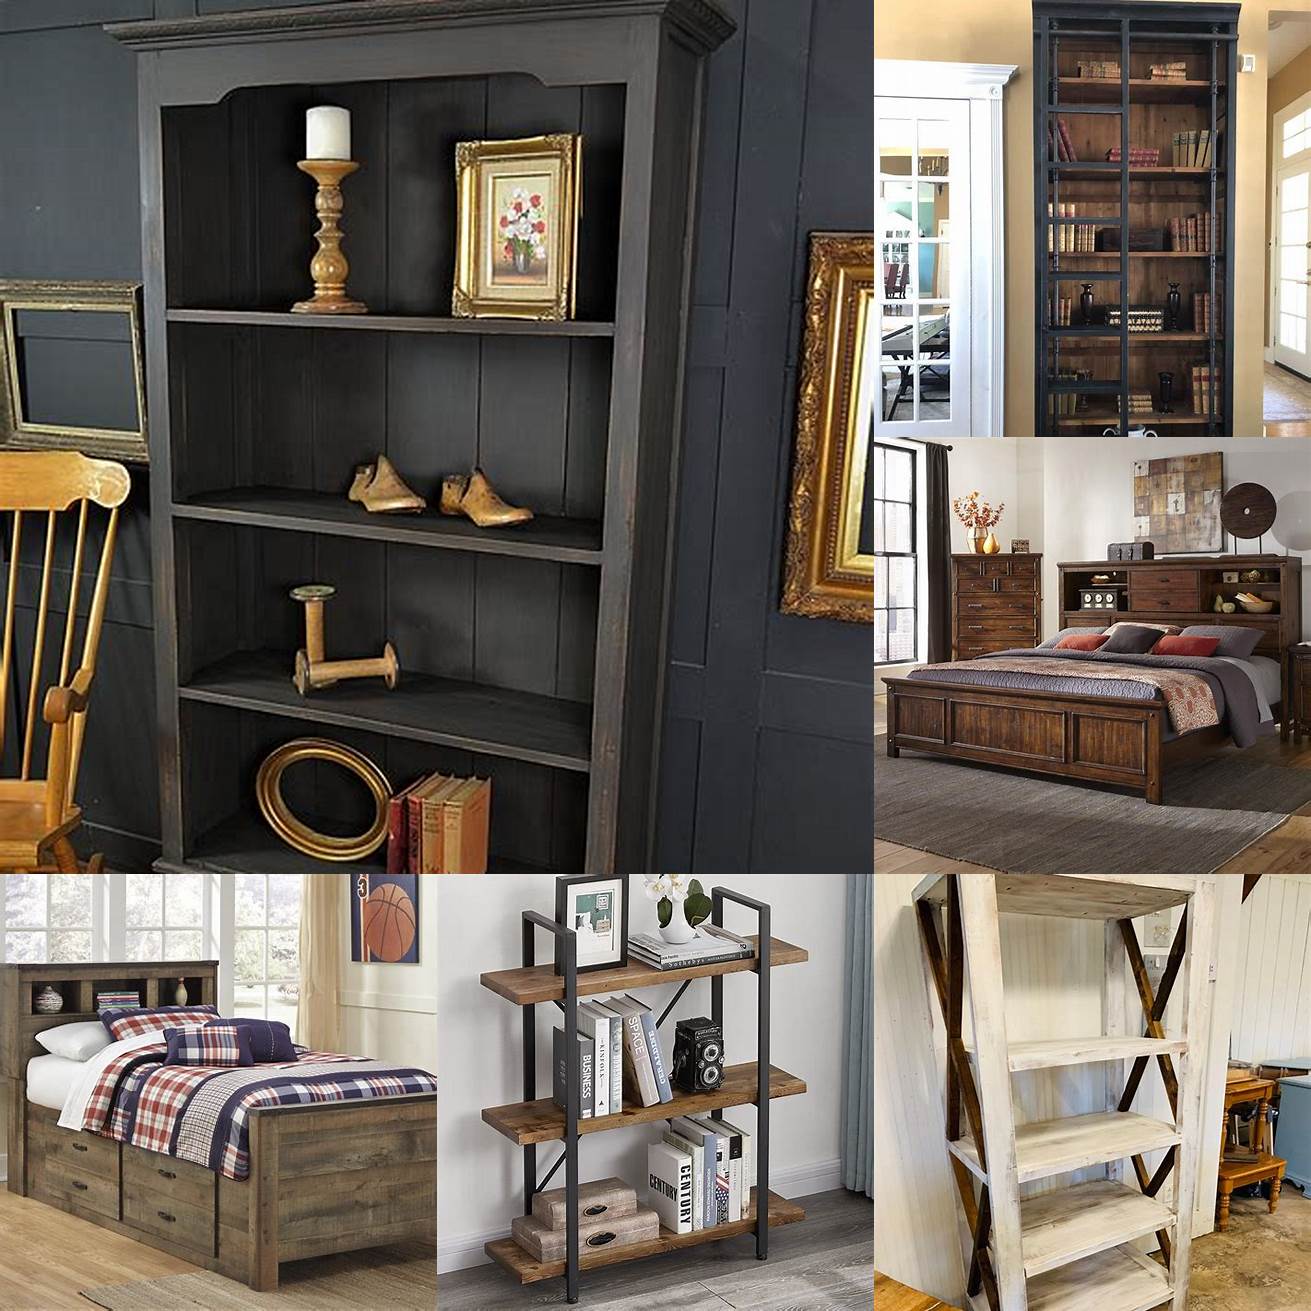 A rustic bookcase bed with distressed wood shelves and a wrought-iron frame